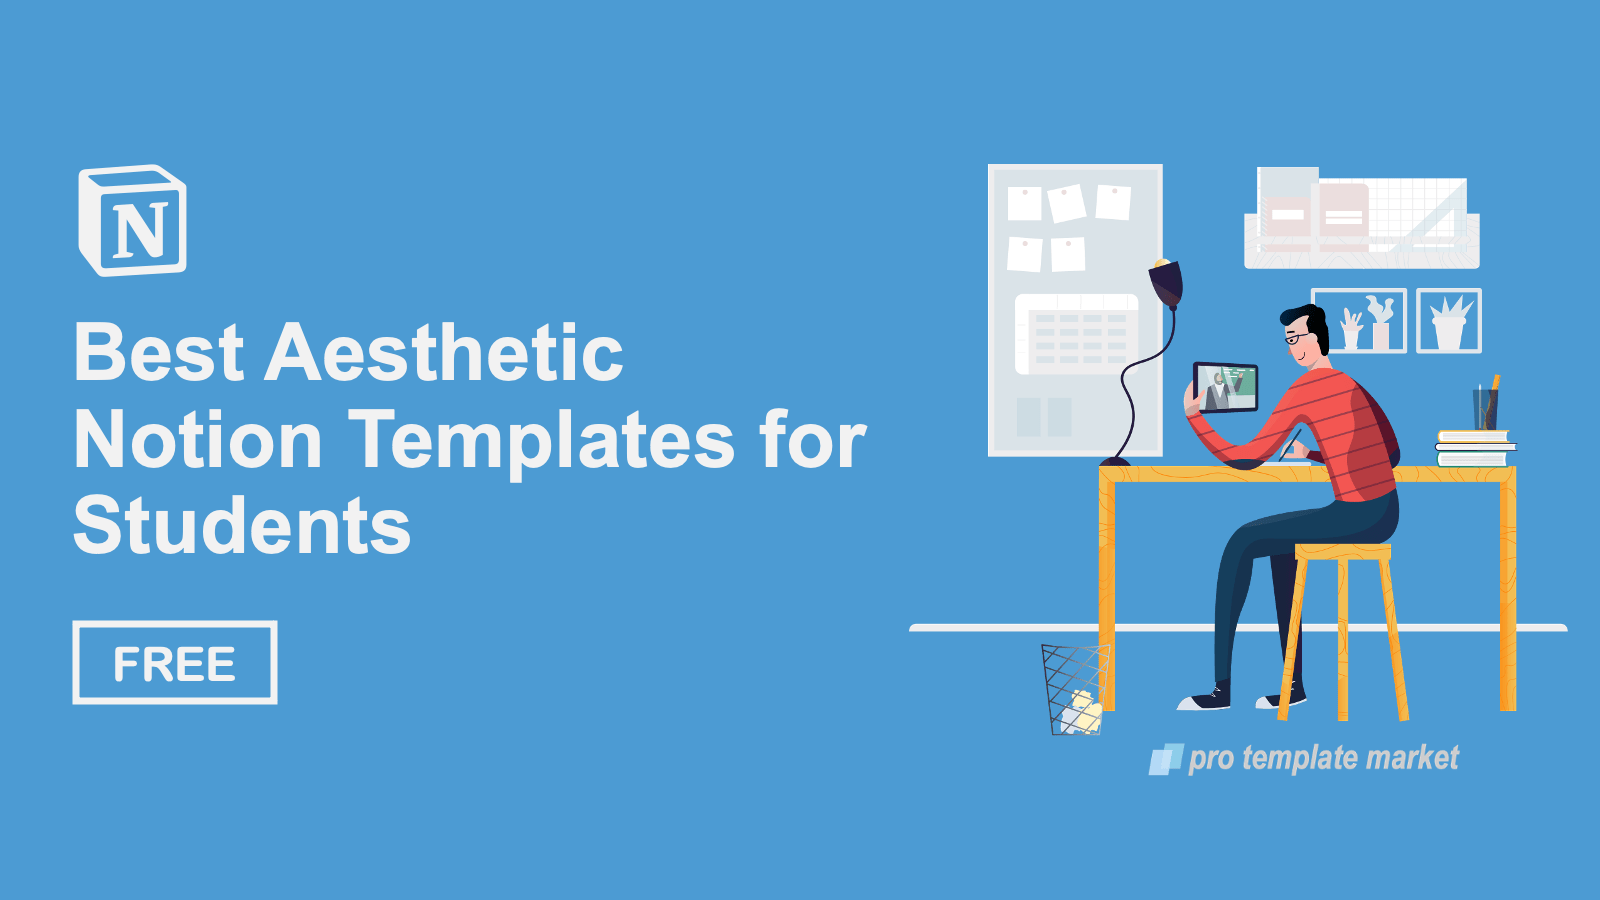 14 Best Aesthetic Notion Templates for Students